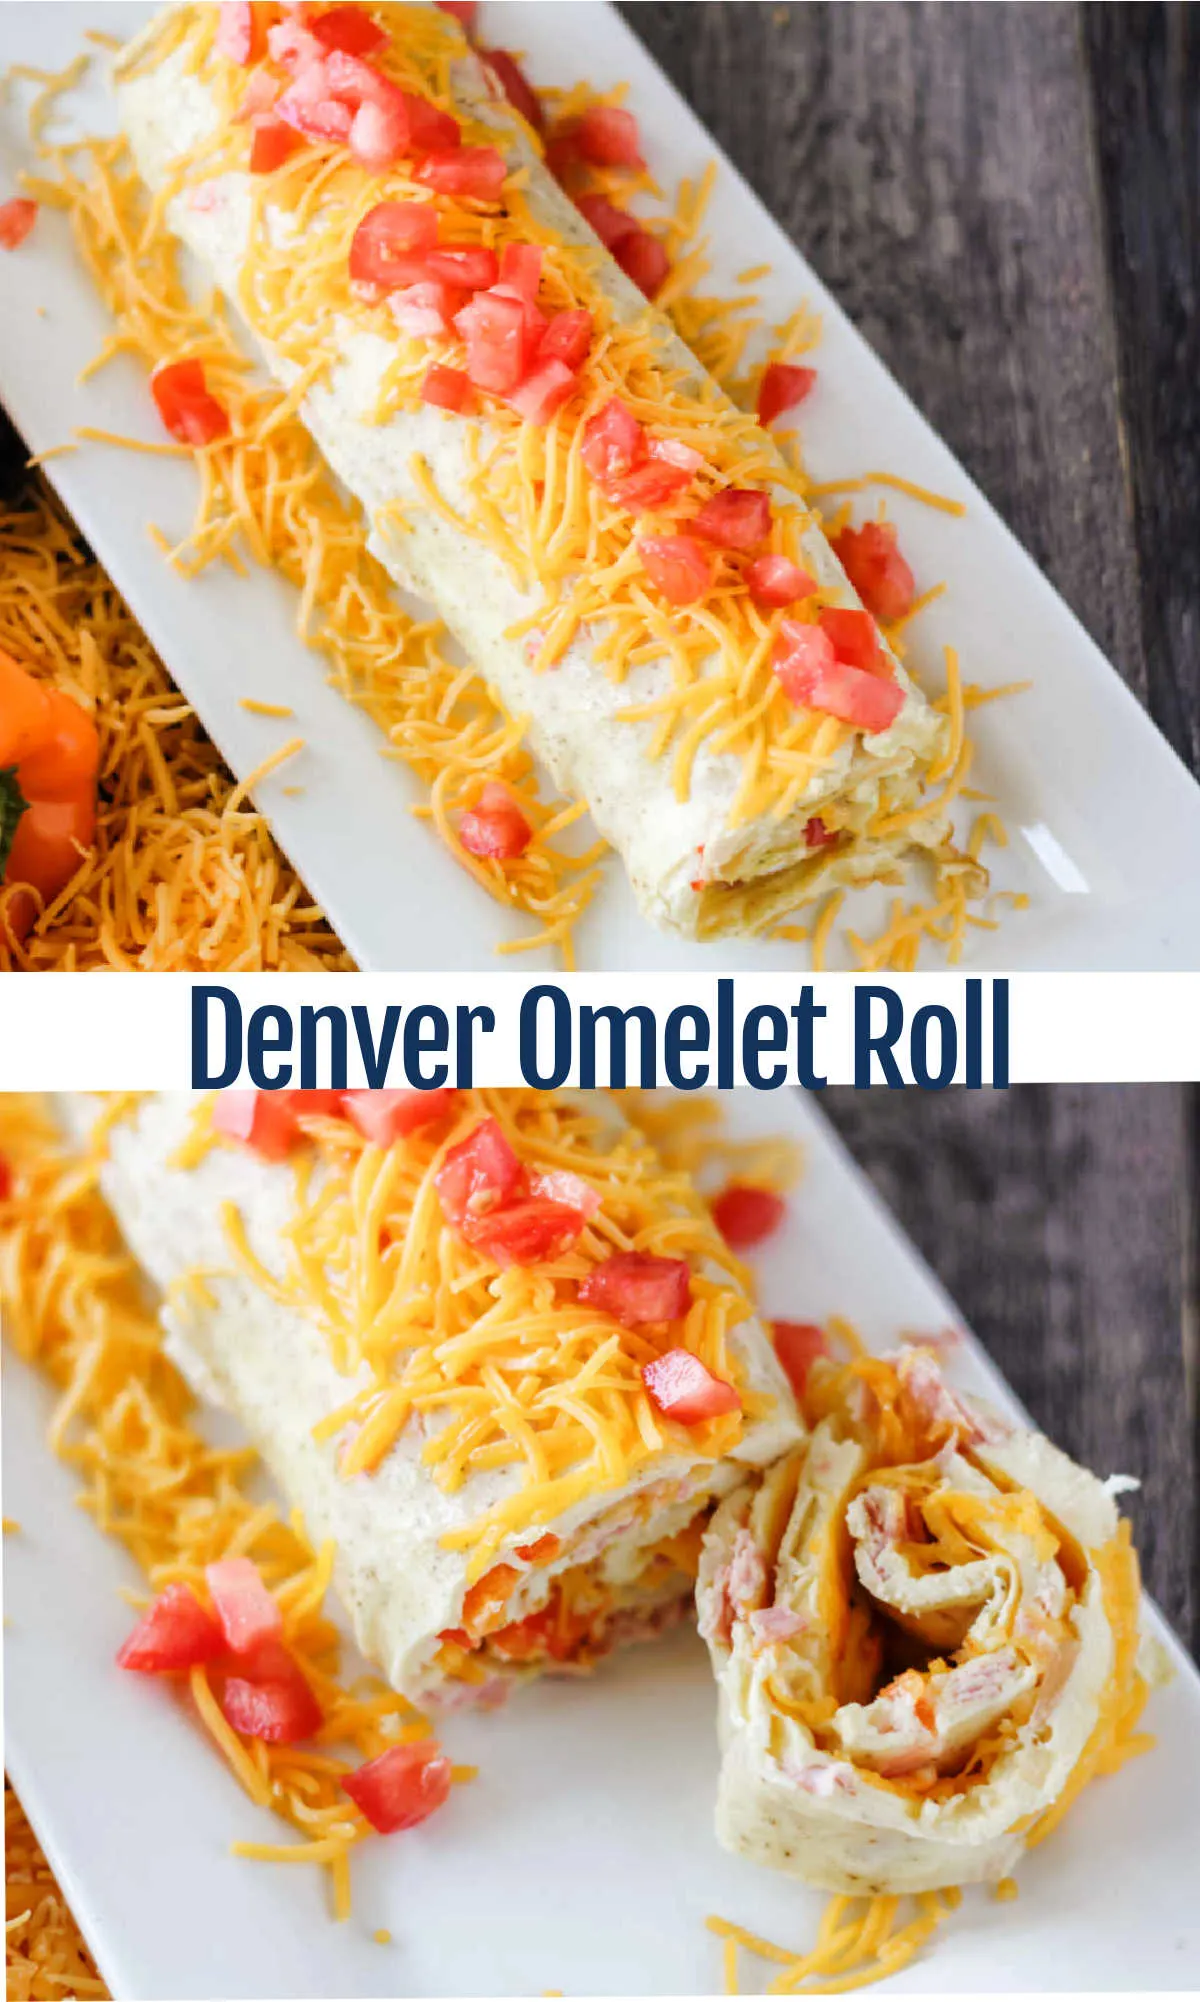 Make this fun Denver omelet roll for your family's breakfast. It's a great way to make omelets for the whole family at once!